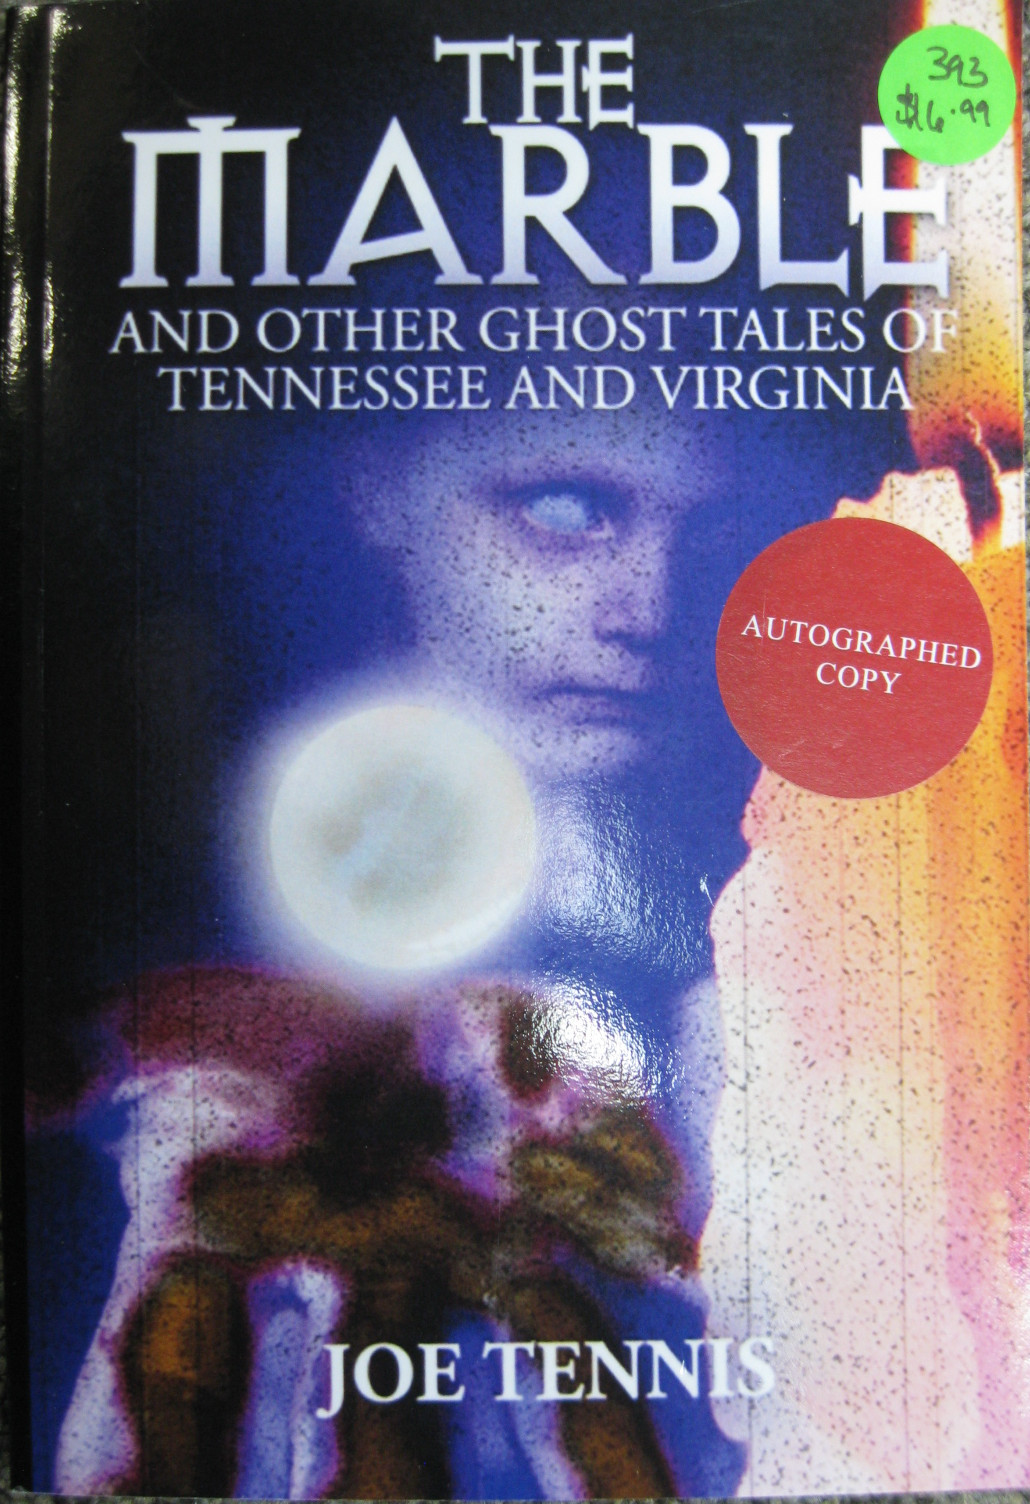 Marble and Other Ghost Tales of Tennessee and Virginia